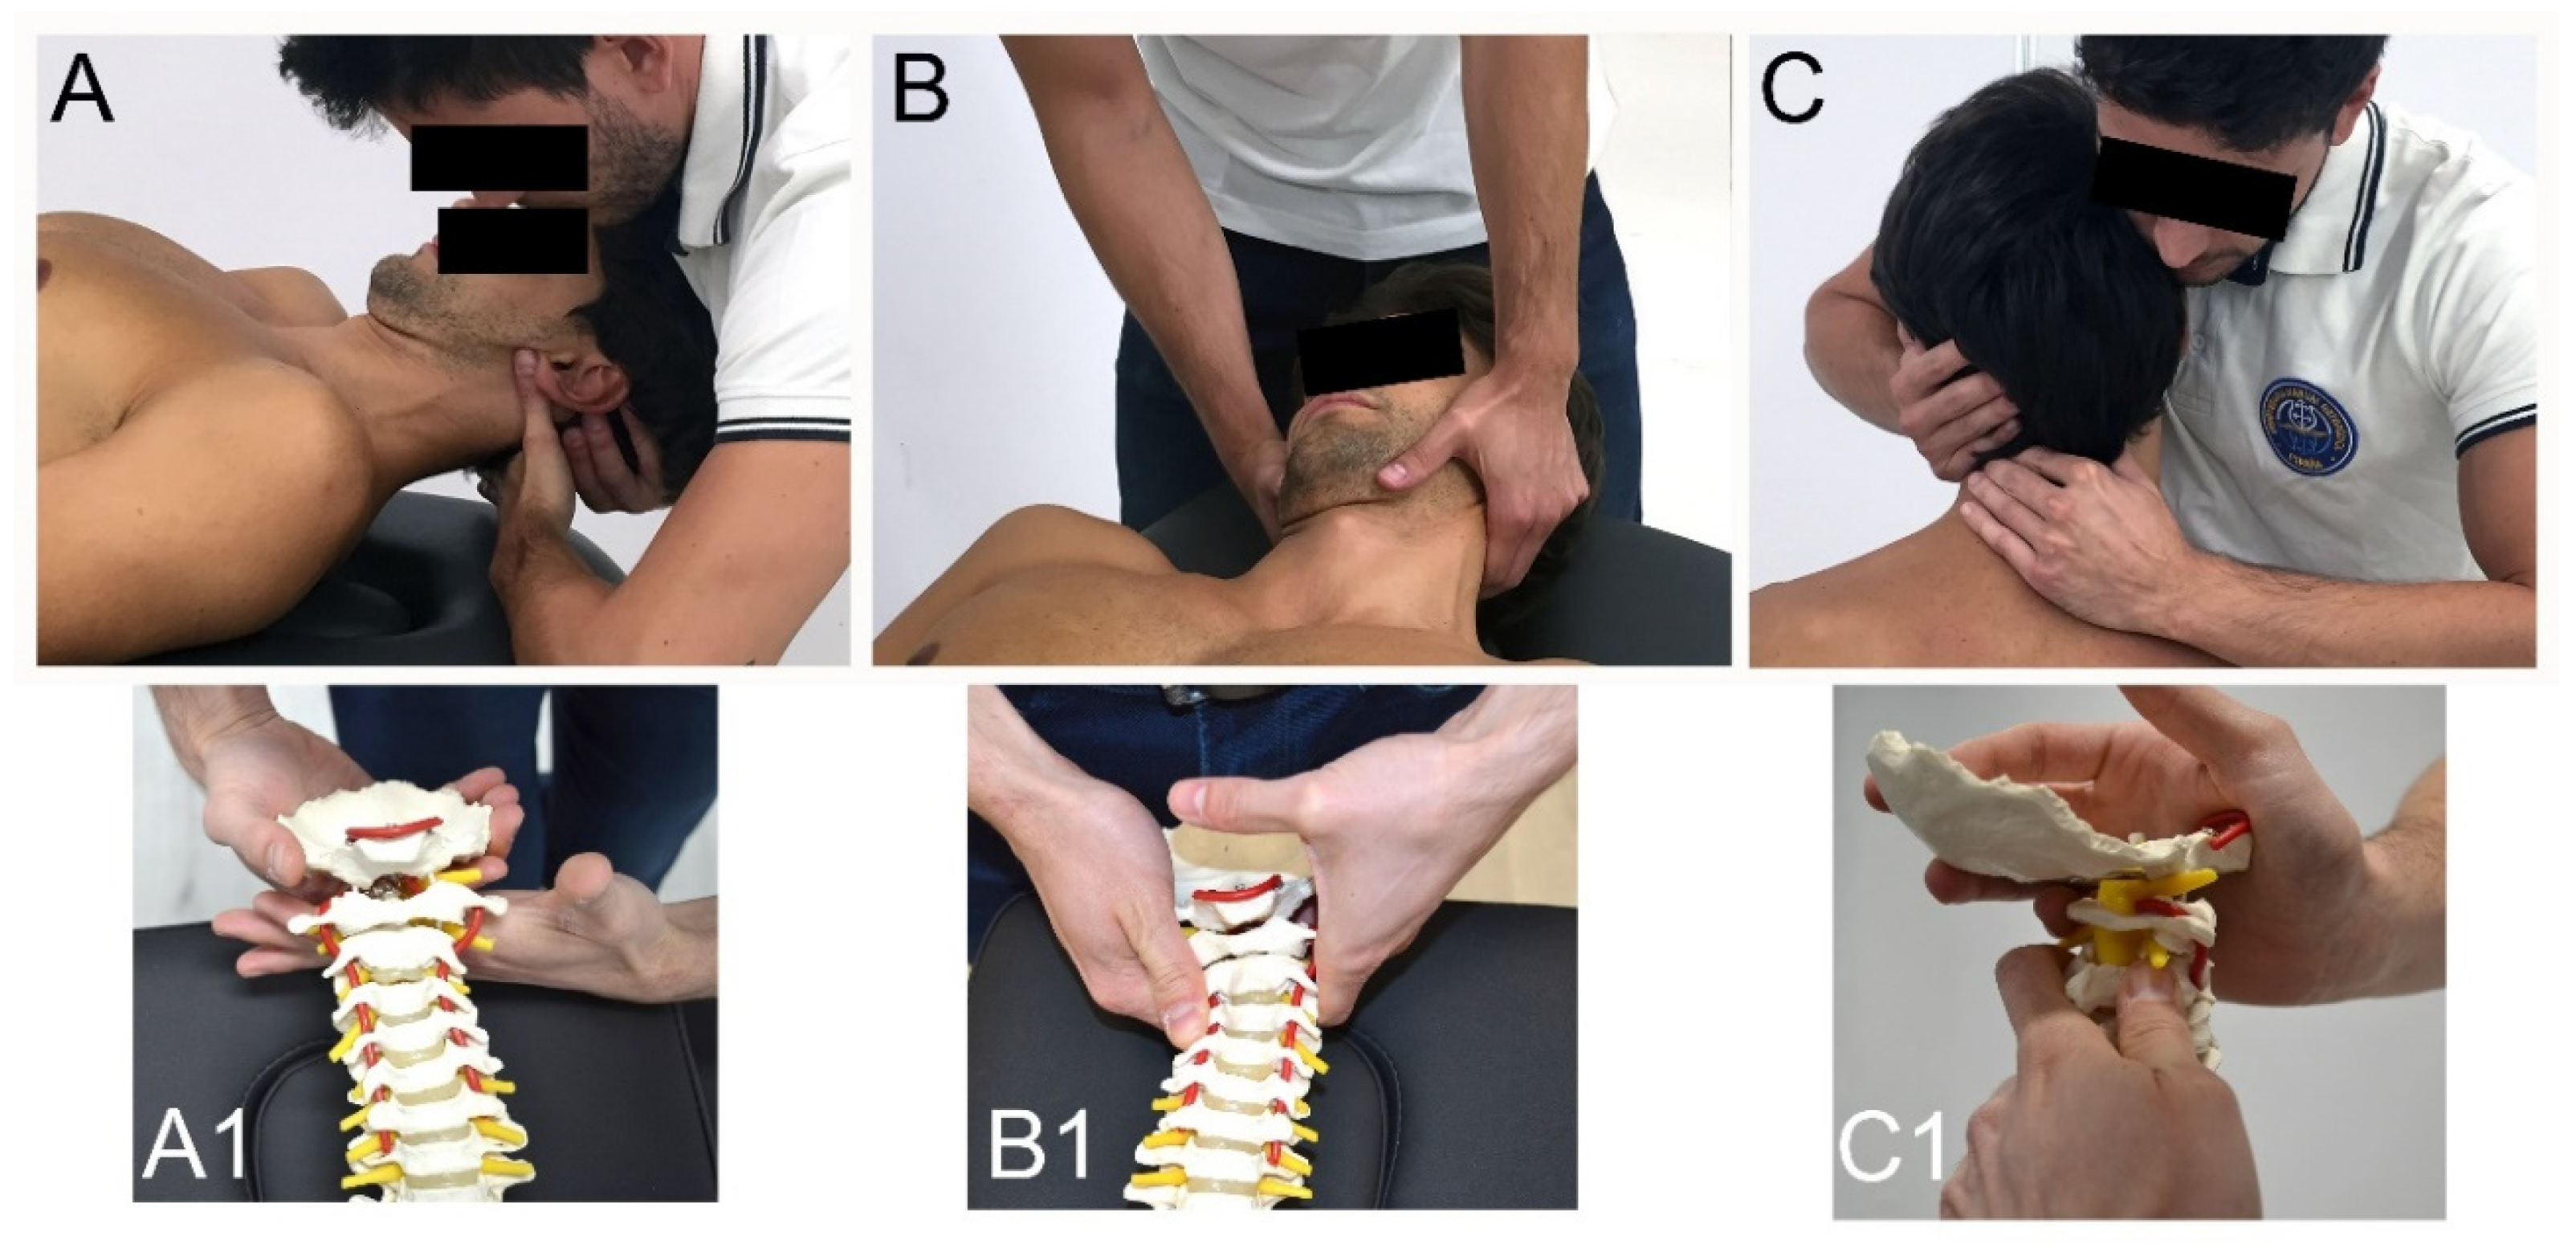 Ijerph Free Full Text Does The Addition Of Manual Therapy Approach To A Cervical Exercise Program Improve Clinical Outcomes For Patients With Chronic Neck Pain In Short And Mid Term A Randomized